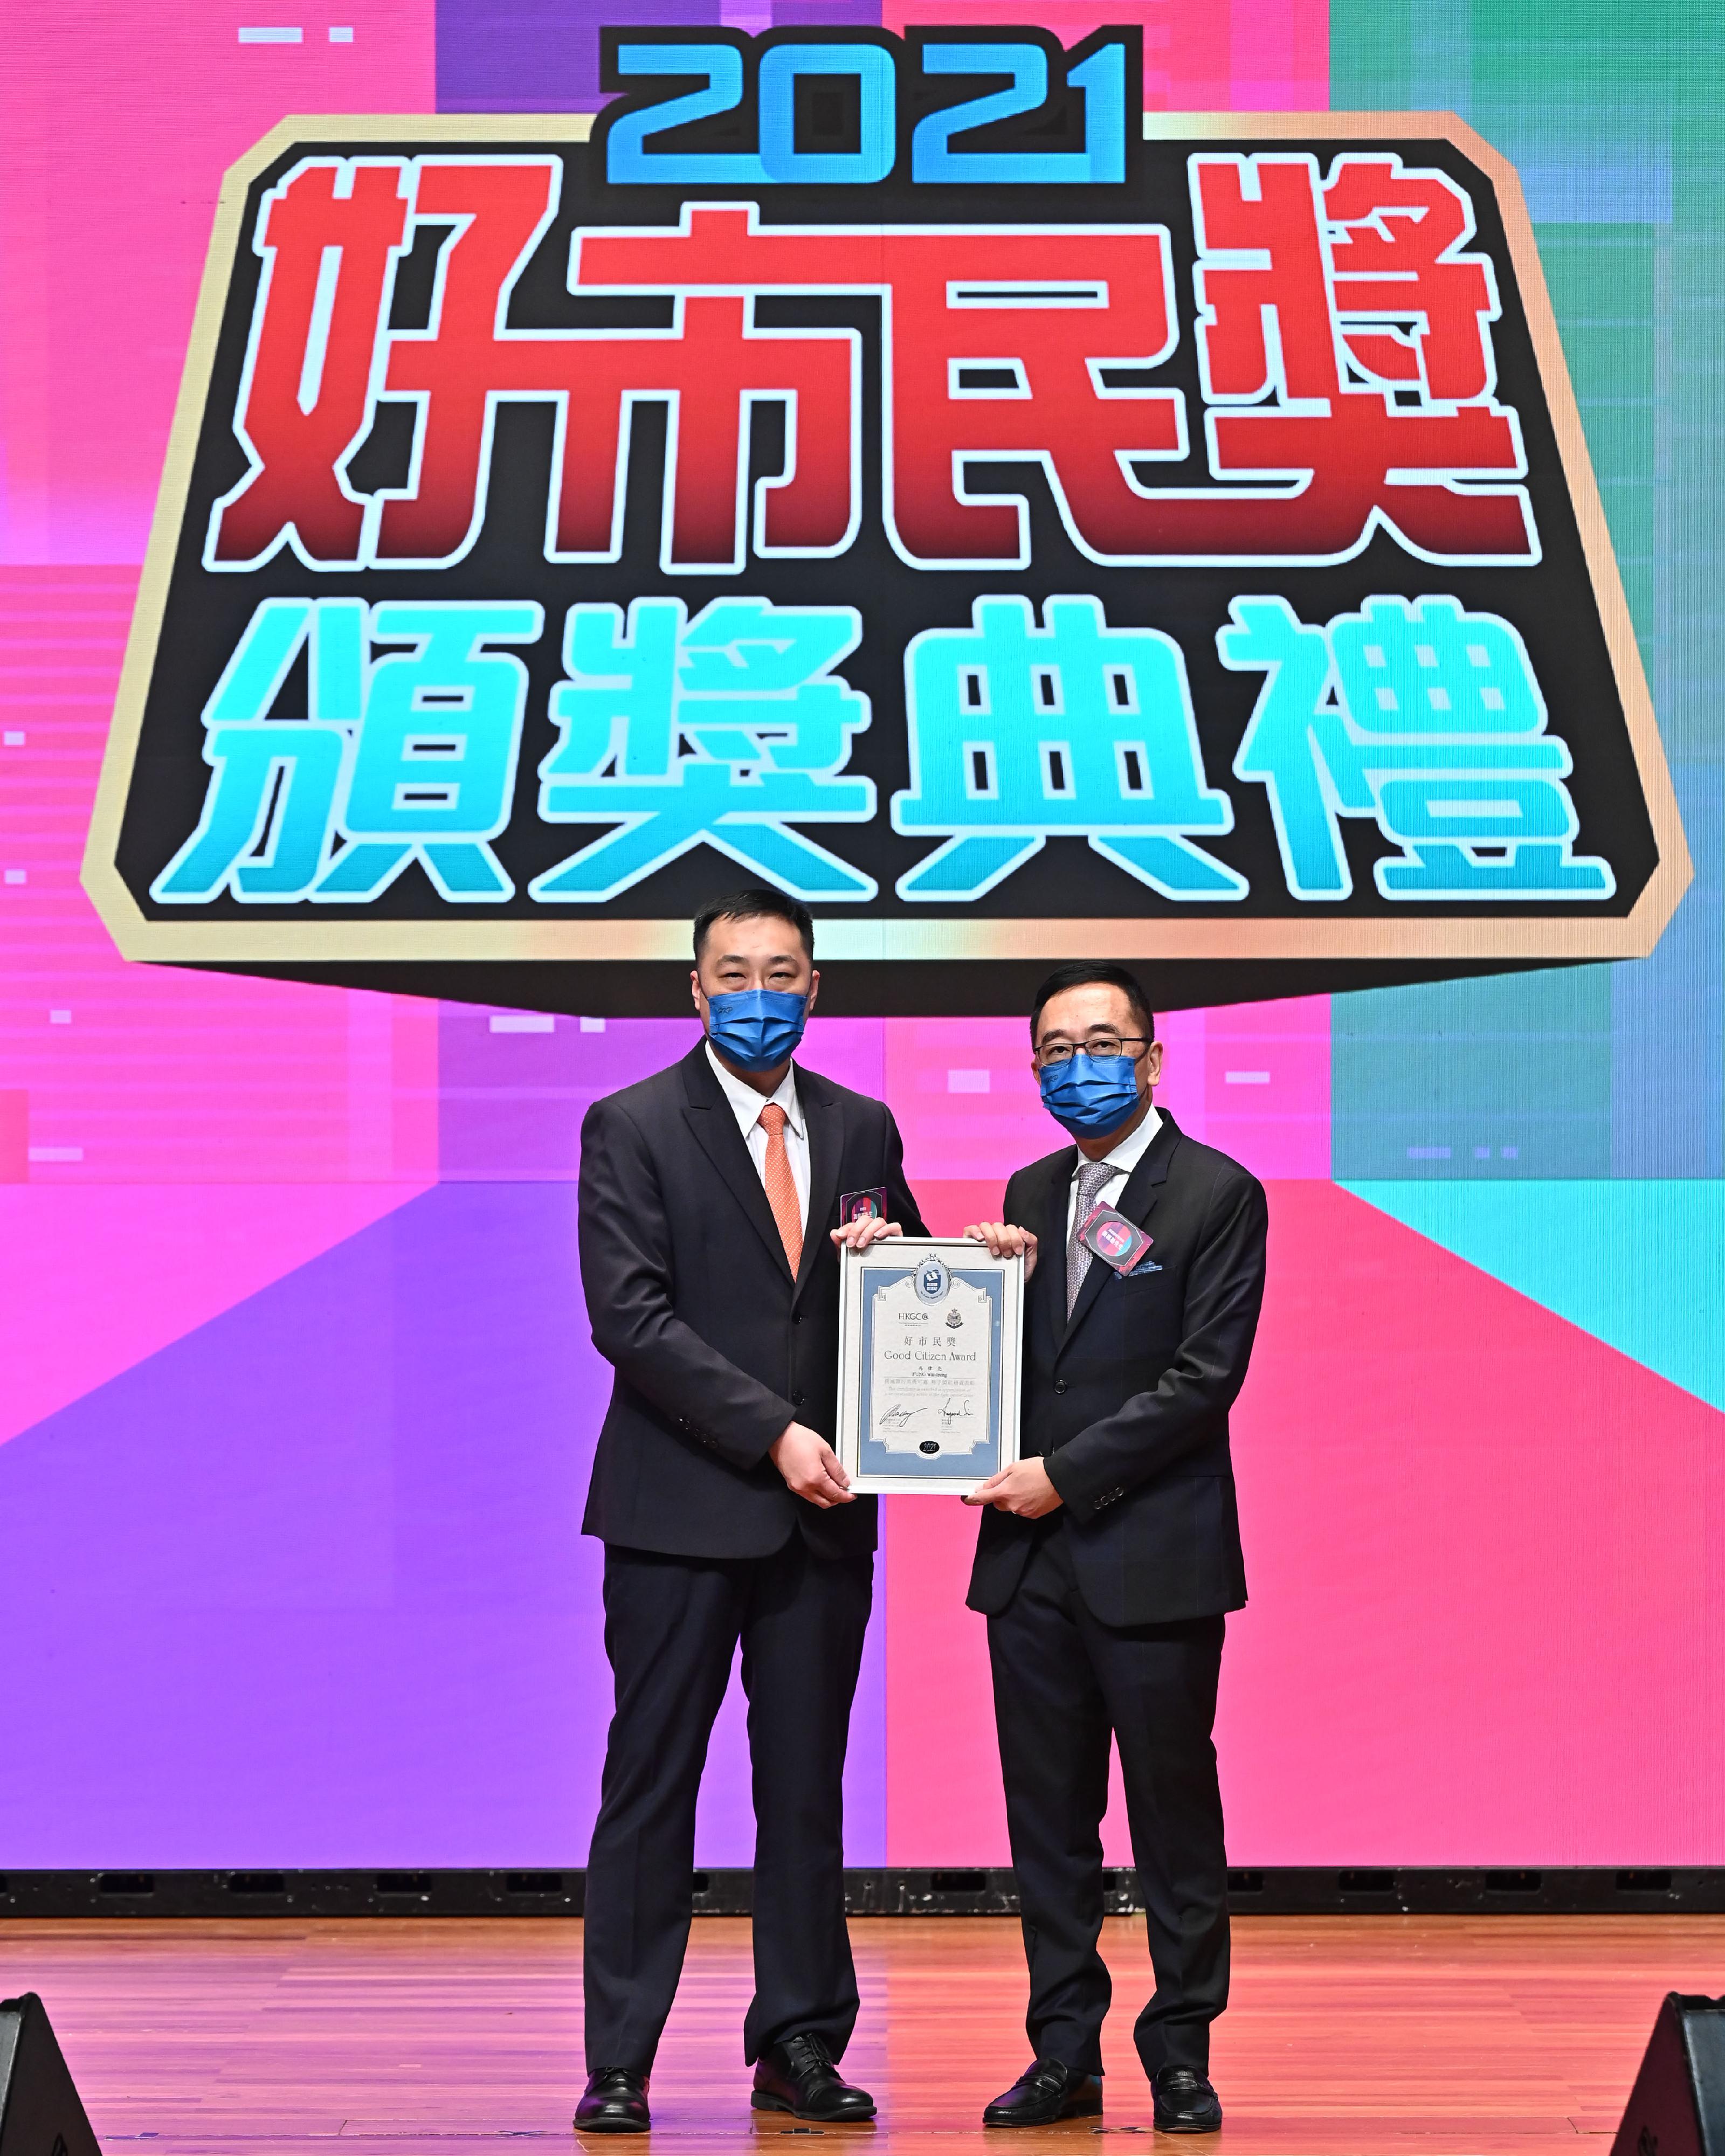 The Good Citizen Award Presentation Ceremony 2021 (Phase II) was held today (August 28). Picture shows the Chief Executive Officer of the Hong Kong General Chamber of Commerce, Mr George Leung (right), presenting the Good Citizen Award to awardee Mr Fung Wai-leong.